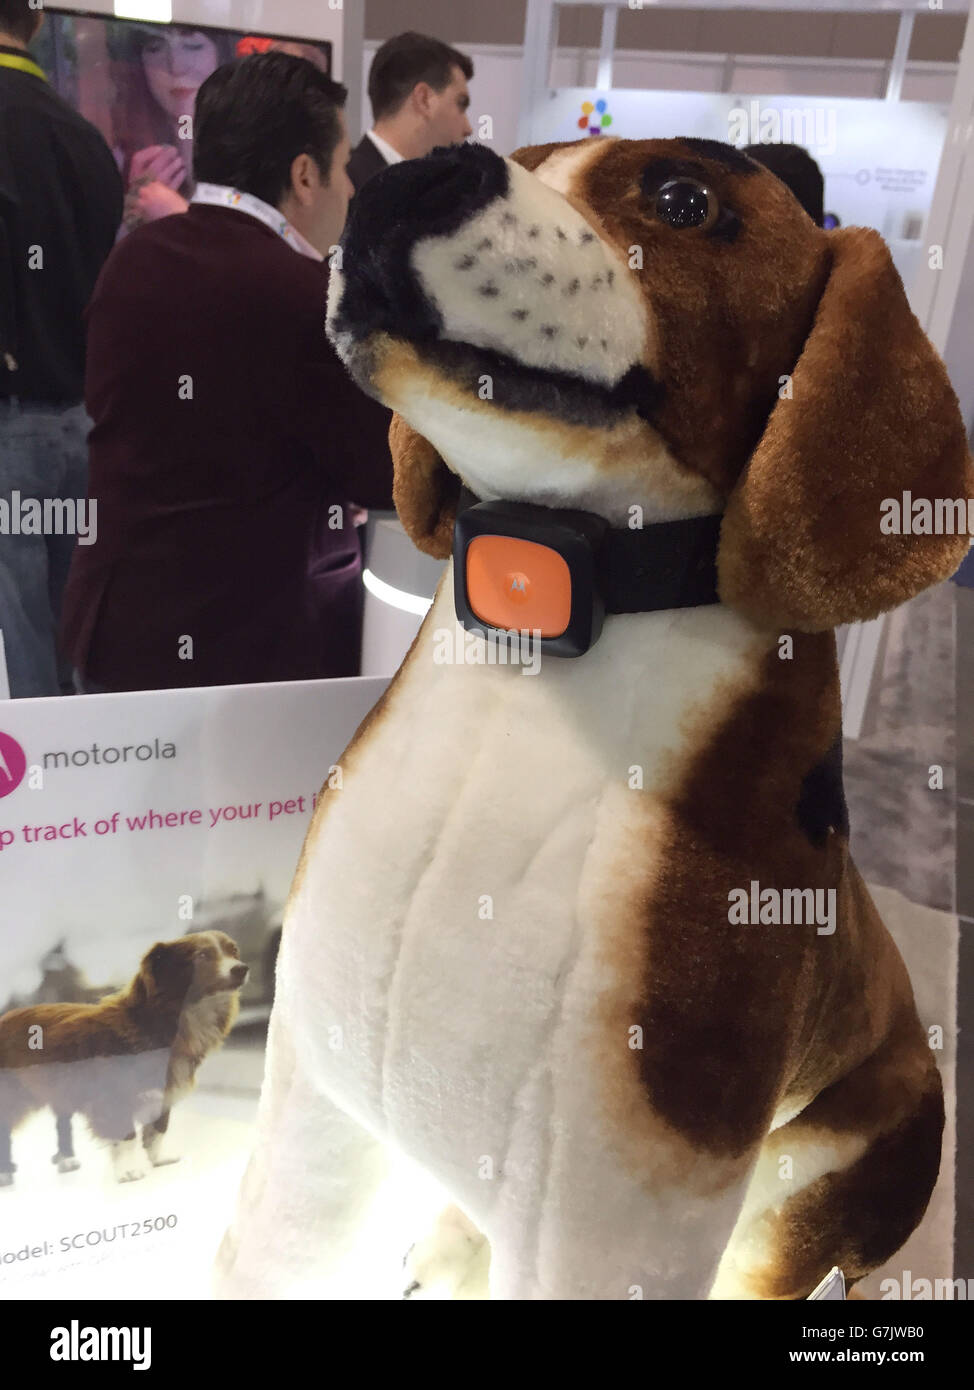 Scout5000 Smart Hundehalsband auf der Consumer Electronics Show (CES) in Las Vegas. Stockfoto